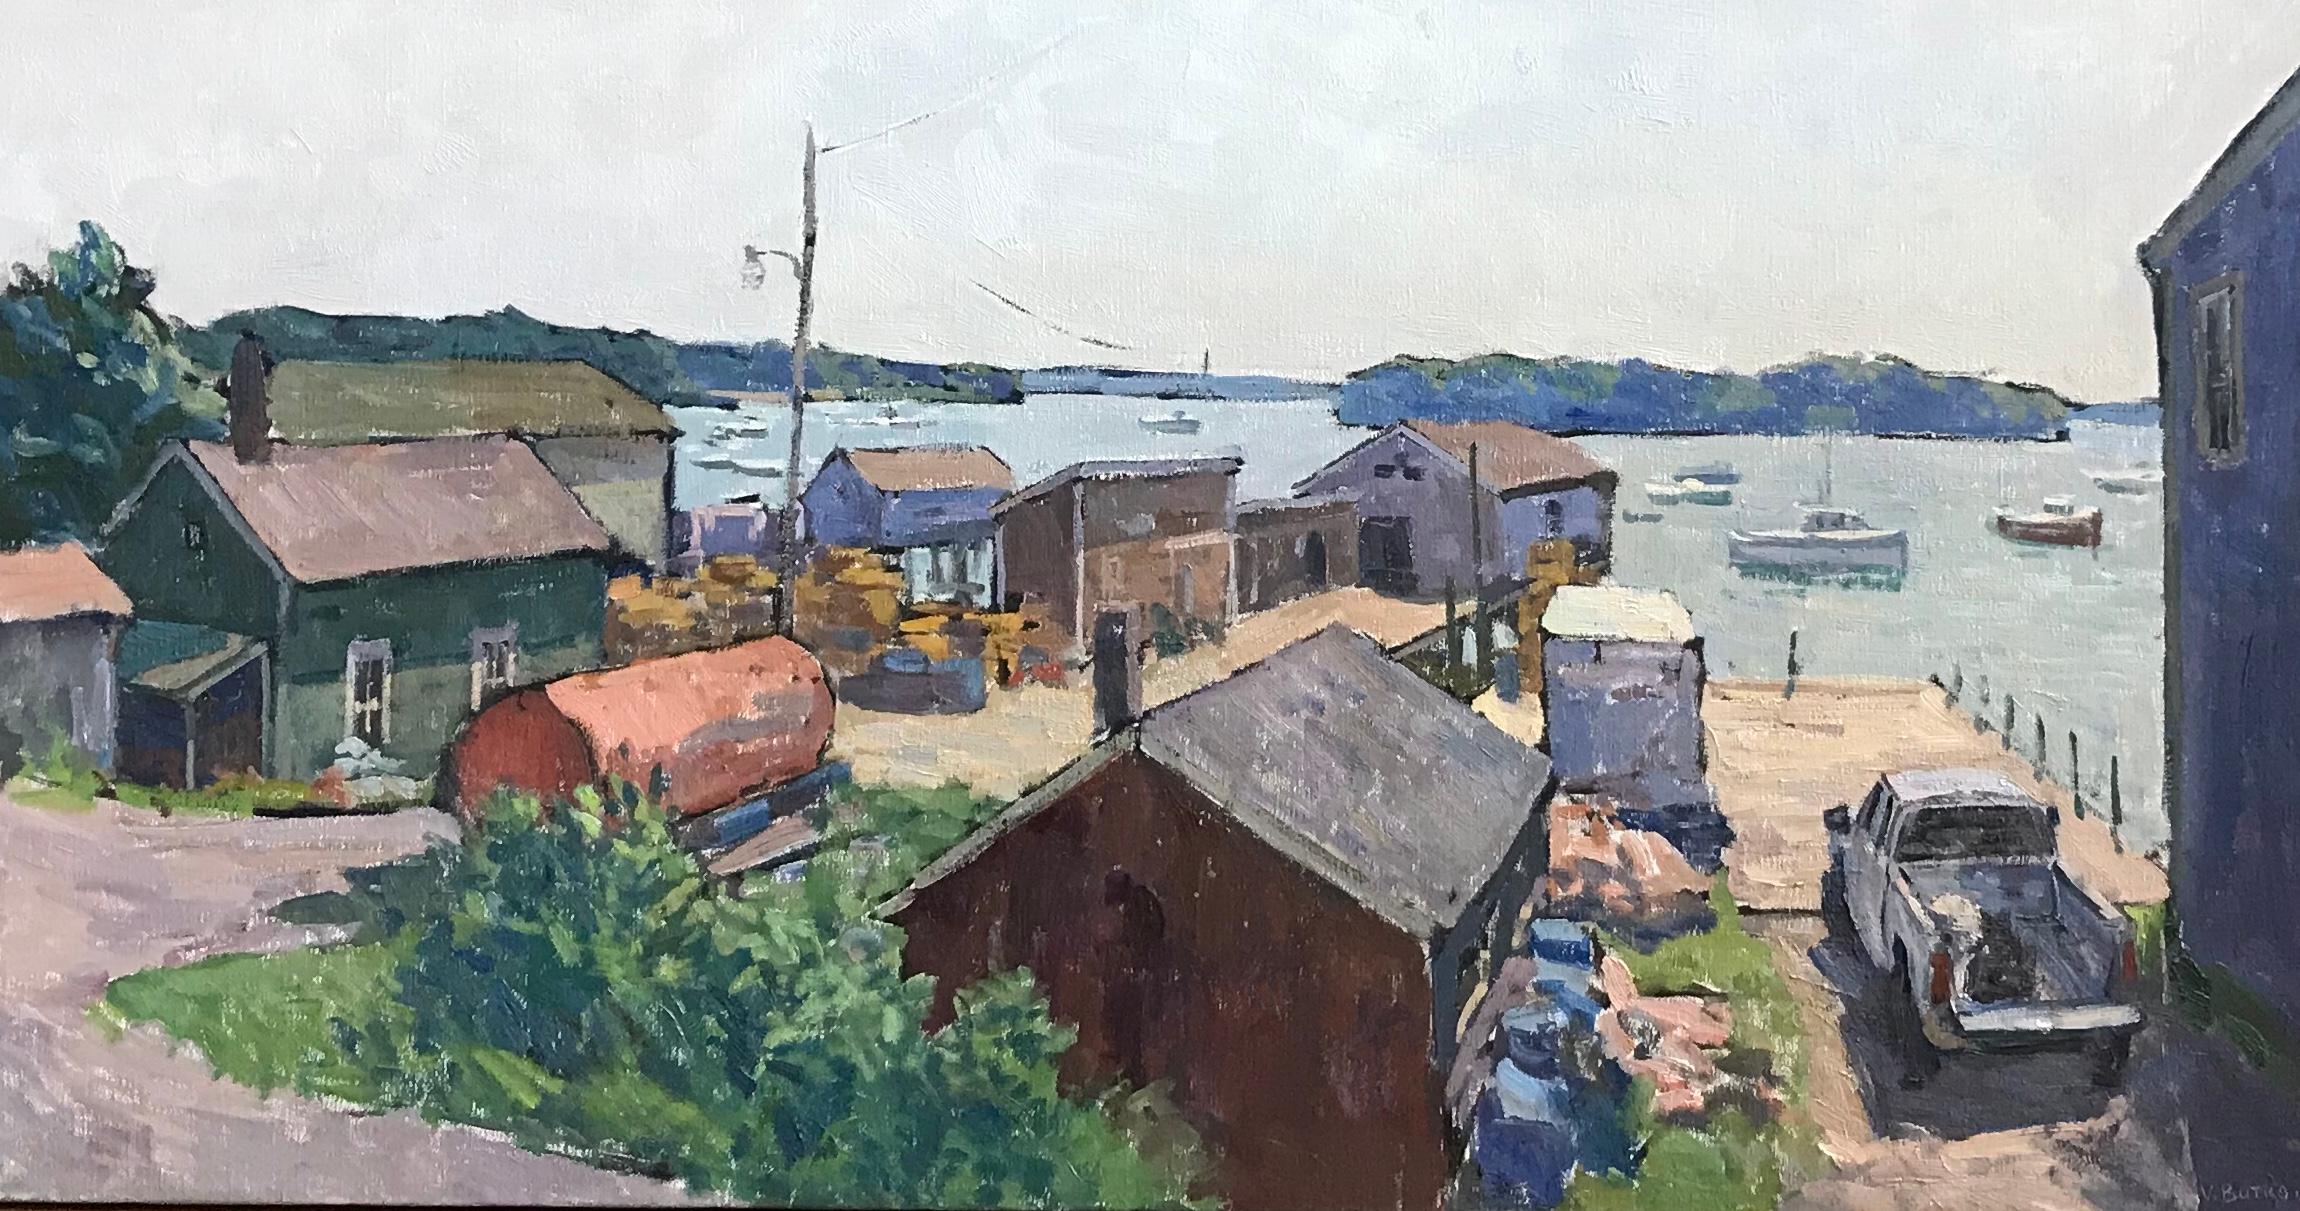 Morning in Friendship - 2023 impressionist oil painting of a dock in Maine